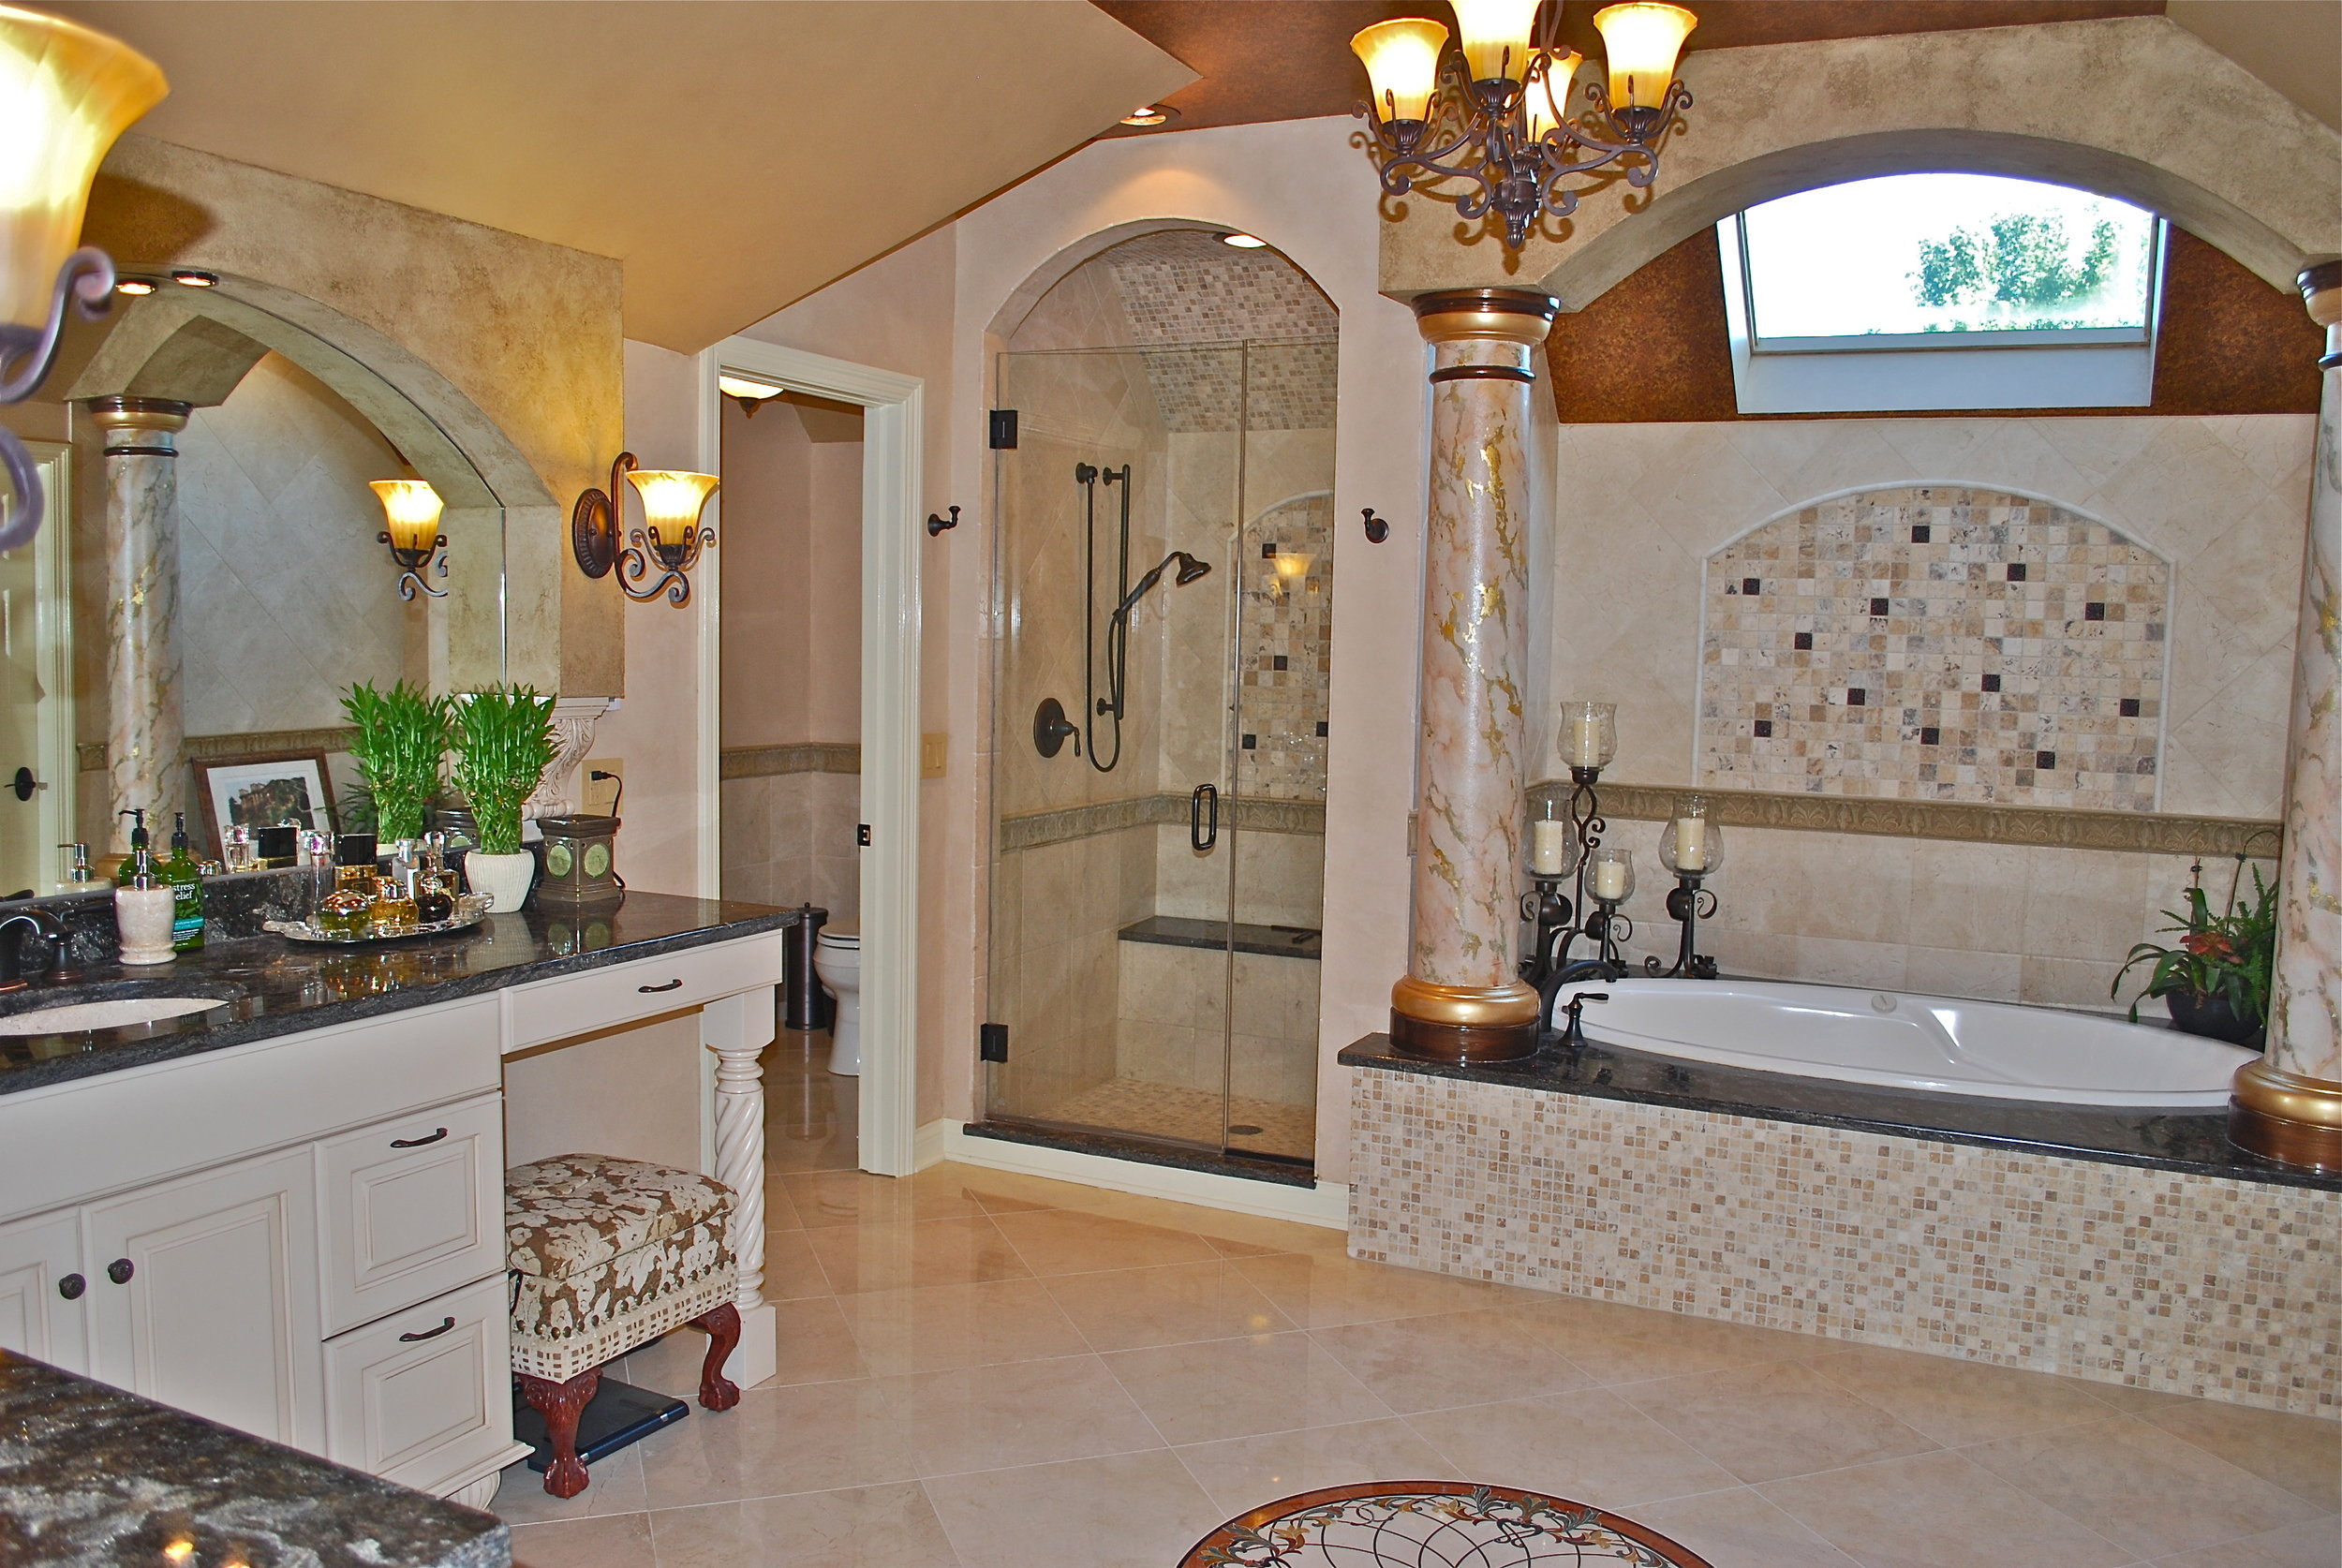 CUSTOM OVER THE TOP BATHROOM IN ST. CHARLES IL